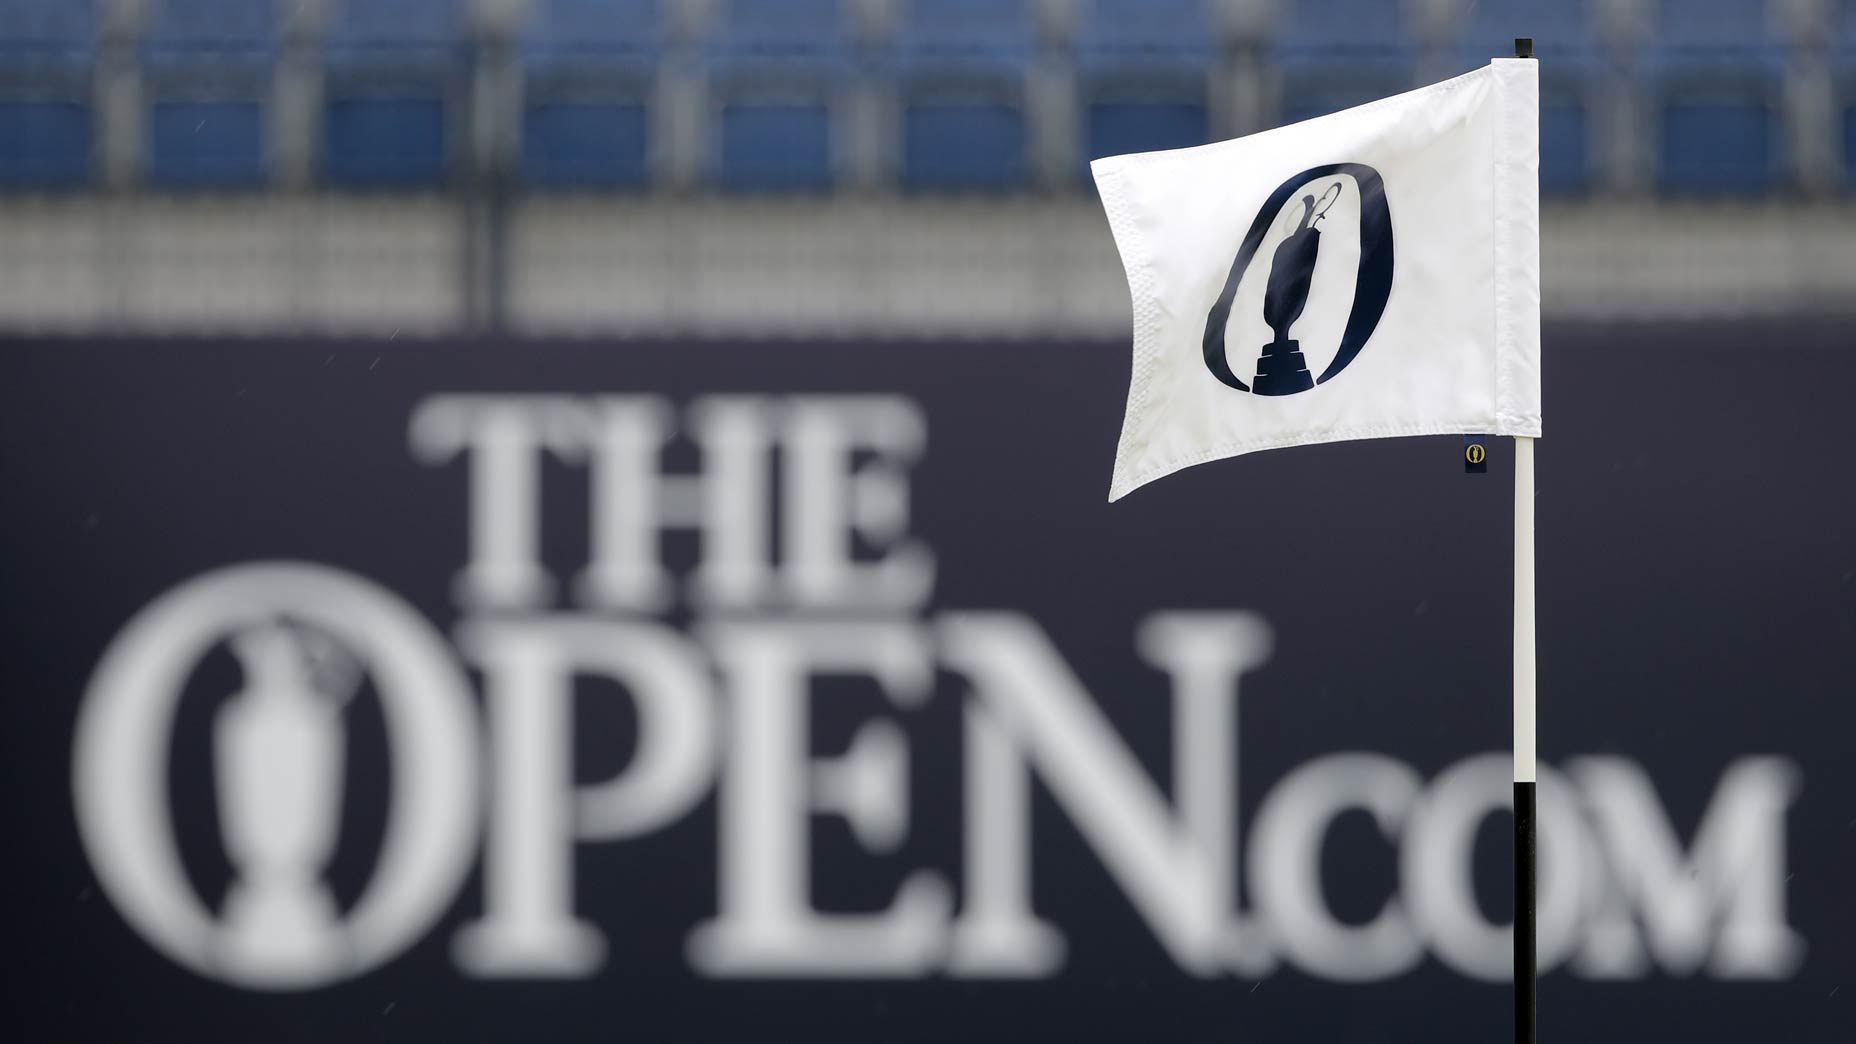 Open Championship rota: The courses that host golf’s oldest major